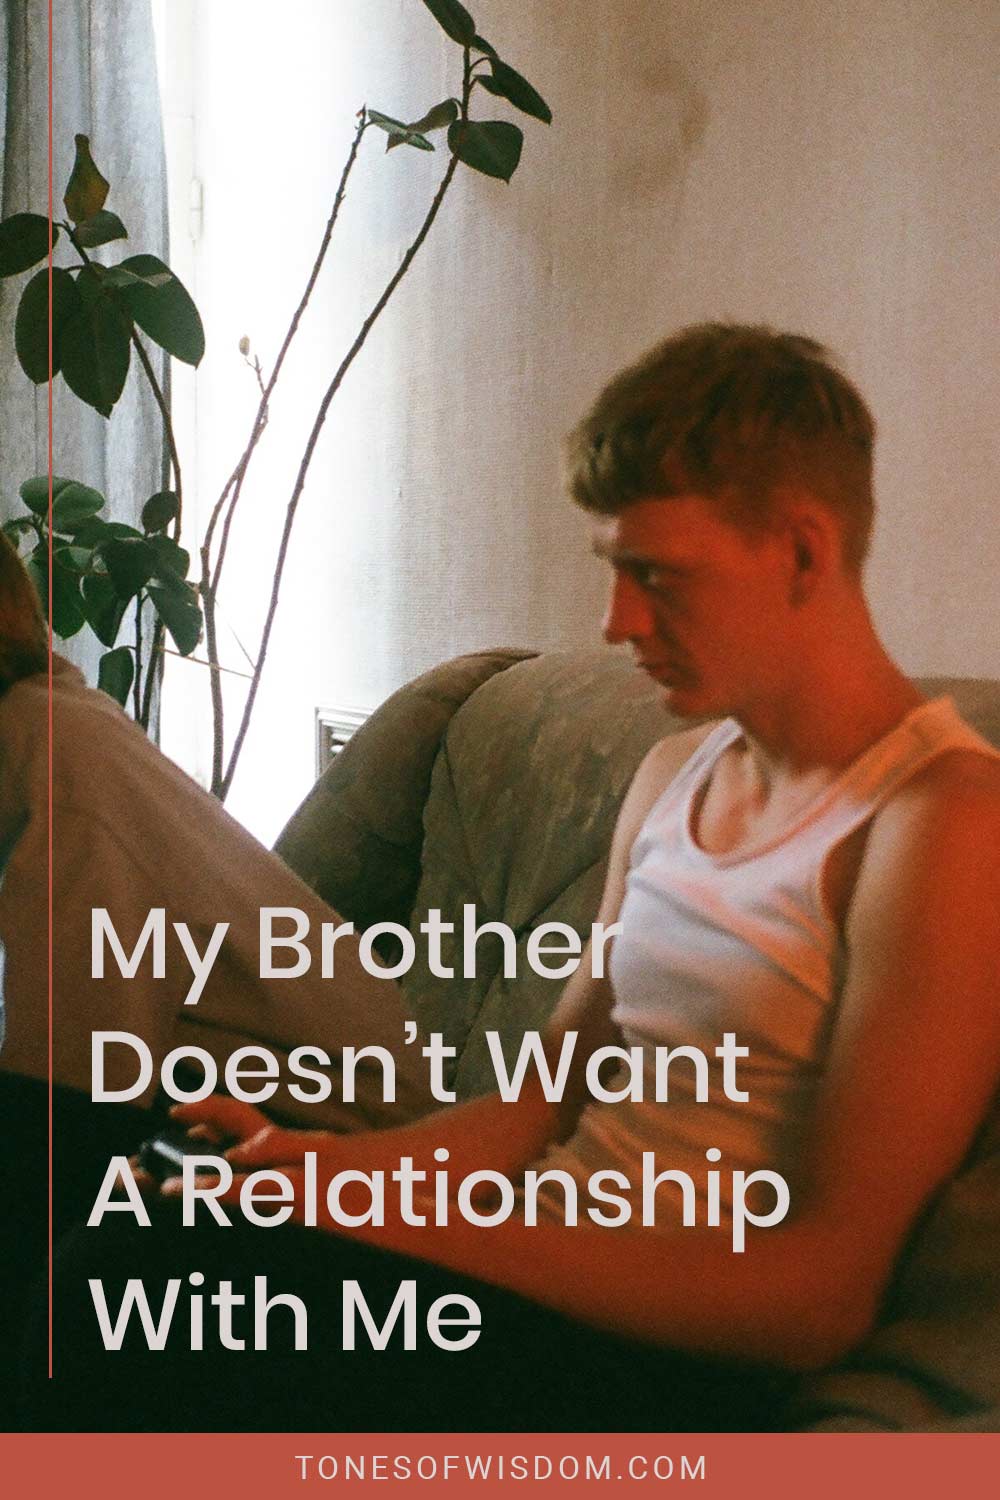 My Brother Doesn’t Want A Relationship With Me